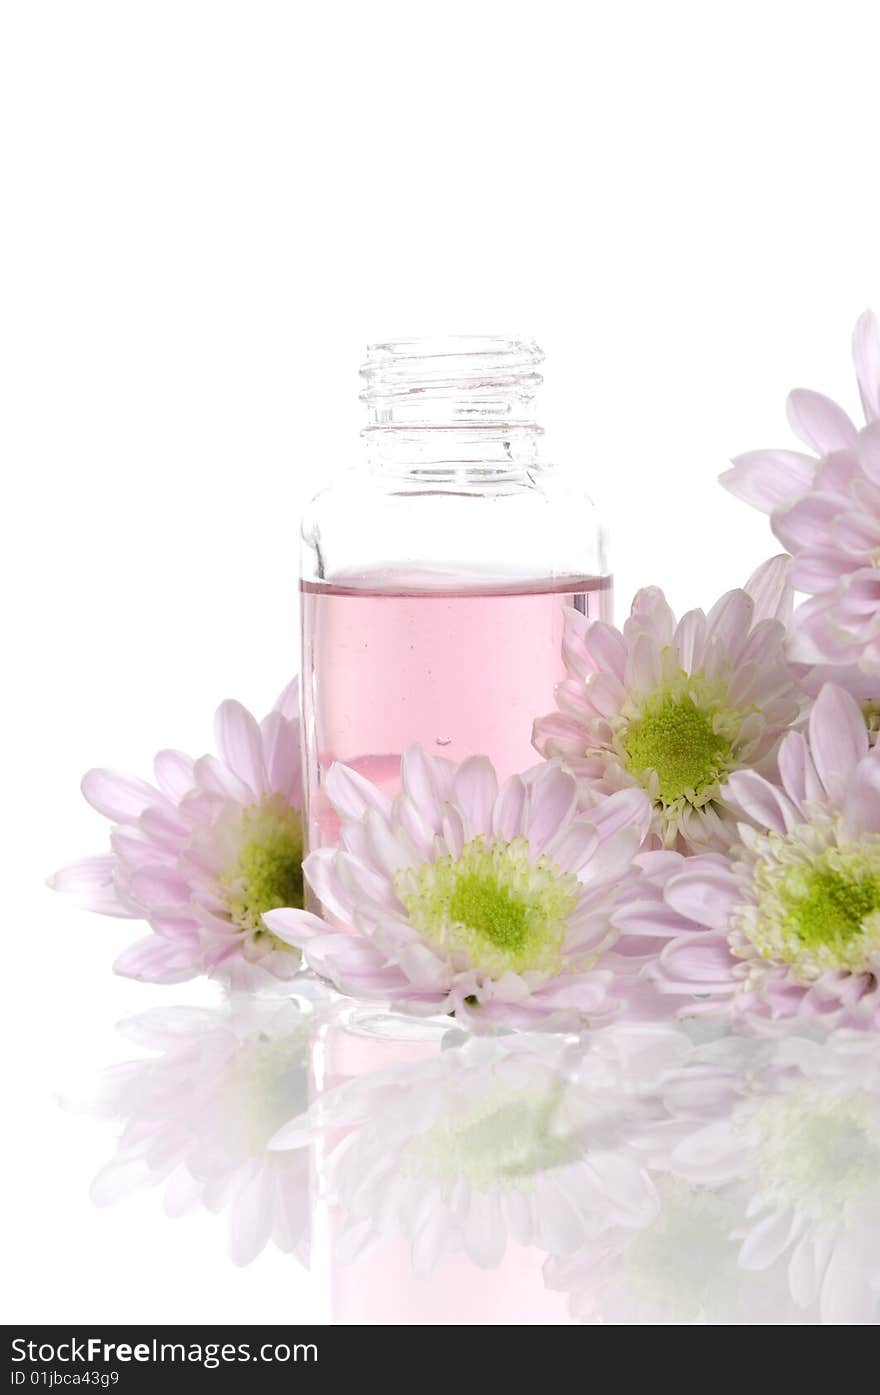 Spa stones, essential oils and daisies. Spa stones, essential oils and daisies